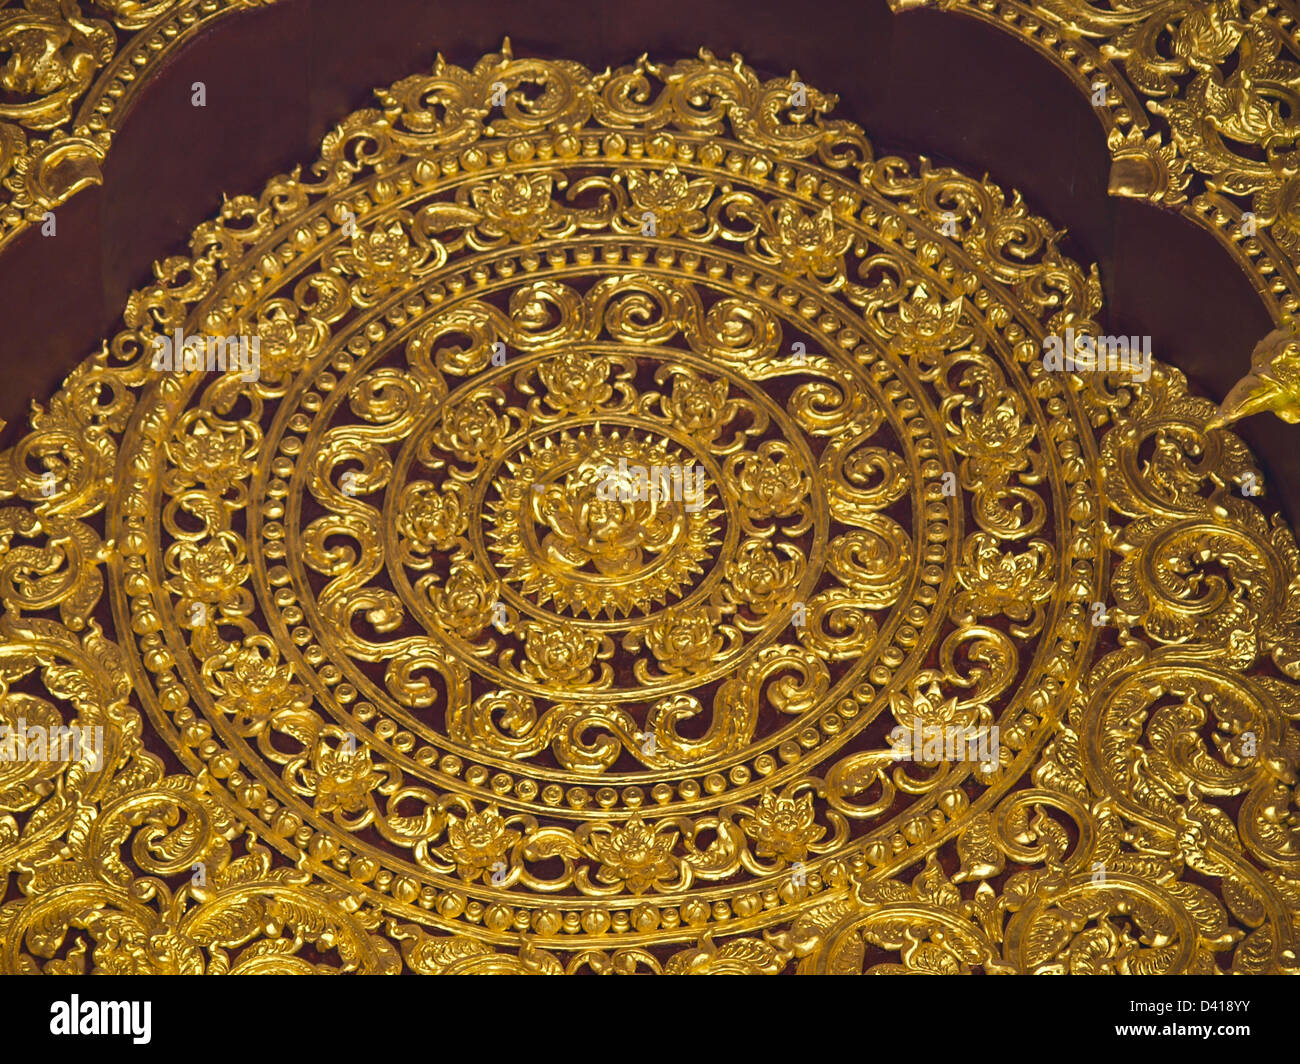 golden wooden carving, Wat Phrathat chomkitti temple in Chiang rai, Thailand. Stock Photo